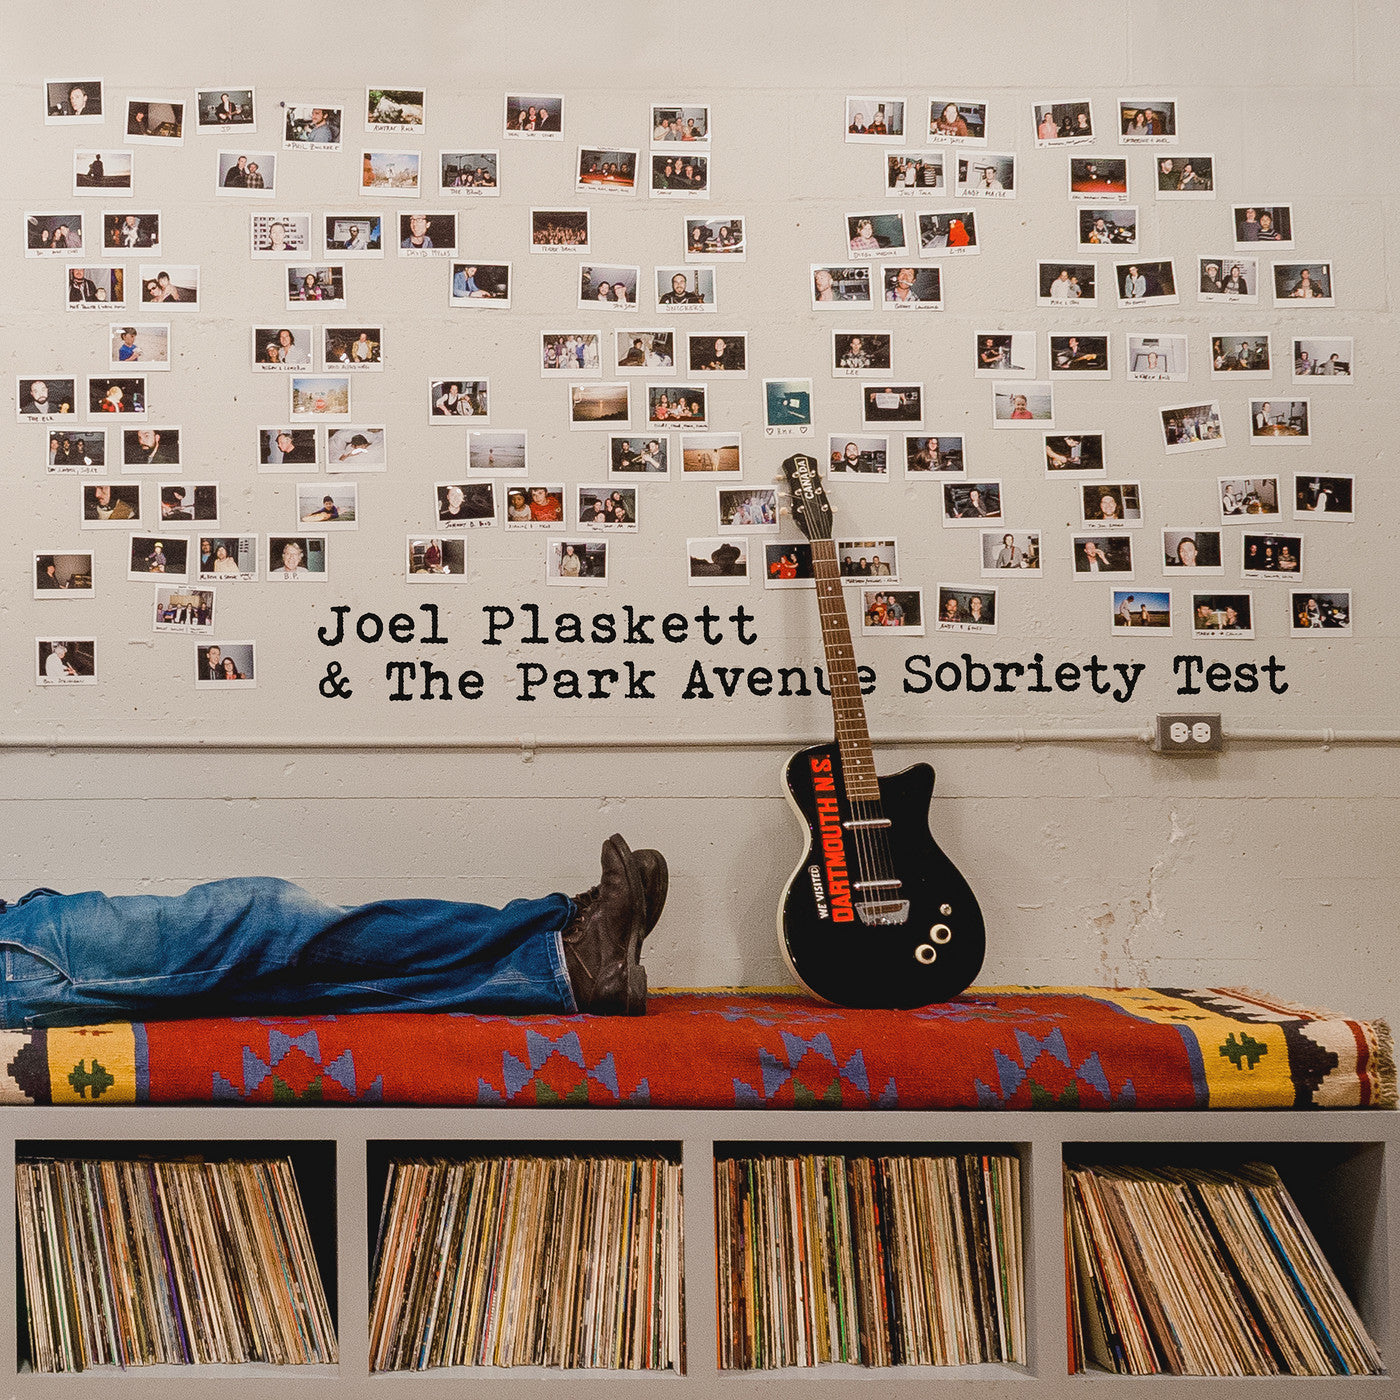 Joel Plaskett & the Park Avenue Sobriety Test album cover featuring a wall of polaroid images and a guitar below along with the lower legs of a man in blue jeans on an ornate rug